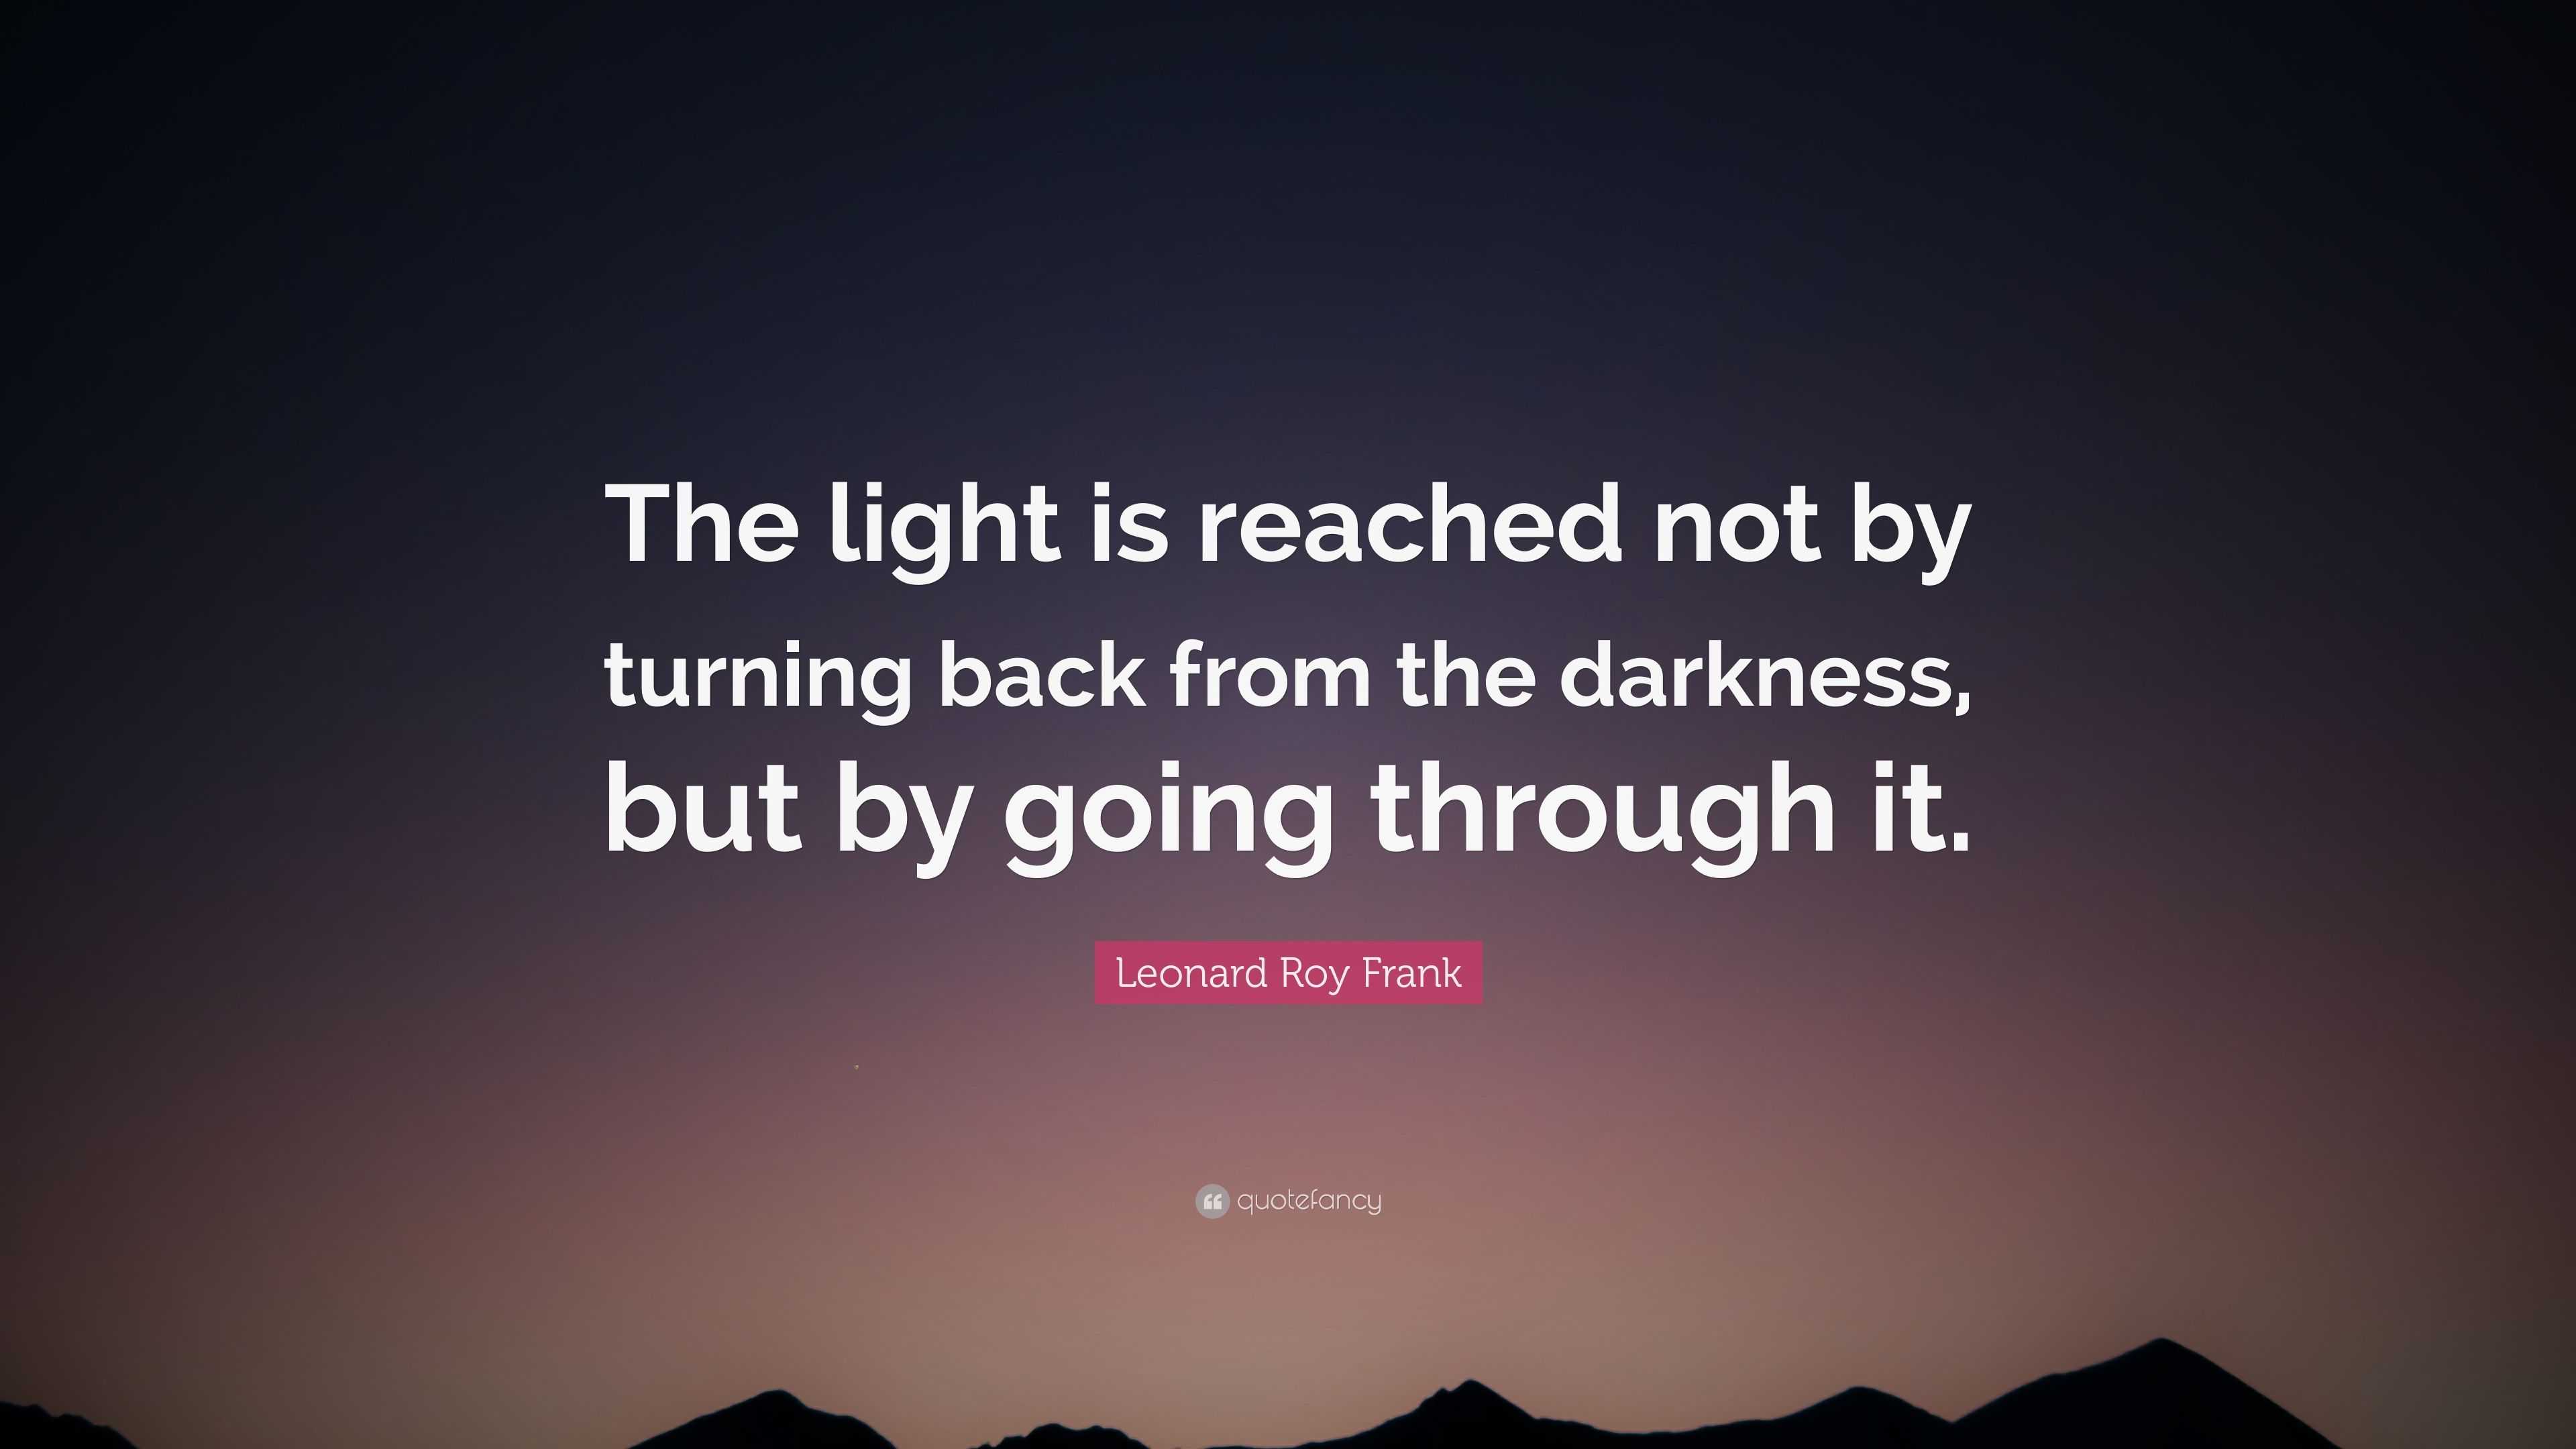 Leonard Roy Frank Quote: “The light is reached not by turning back from ...